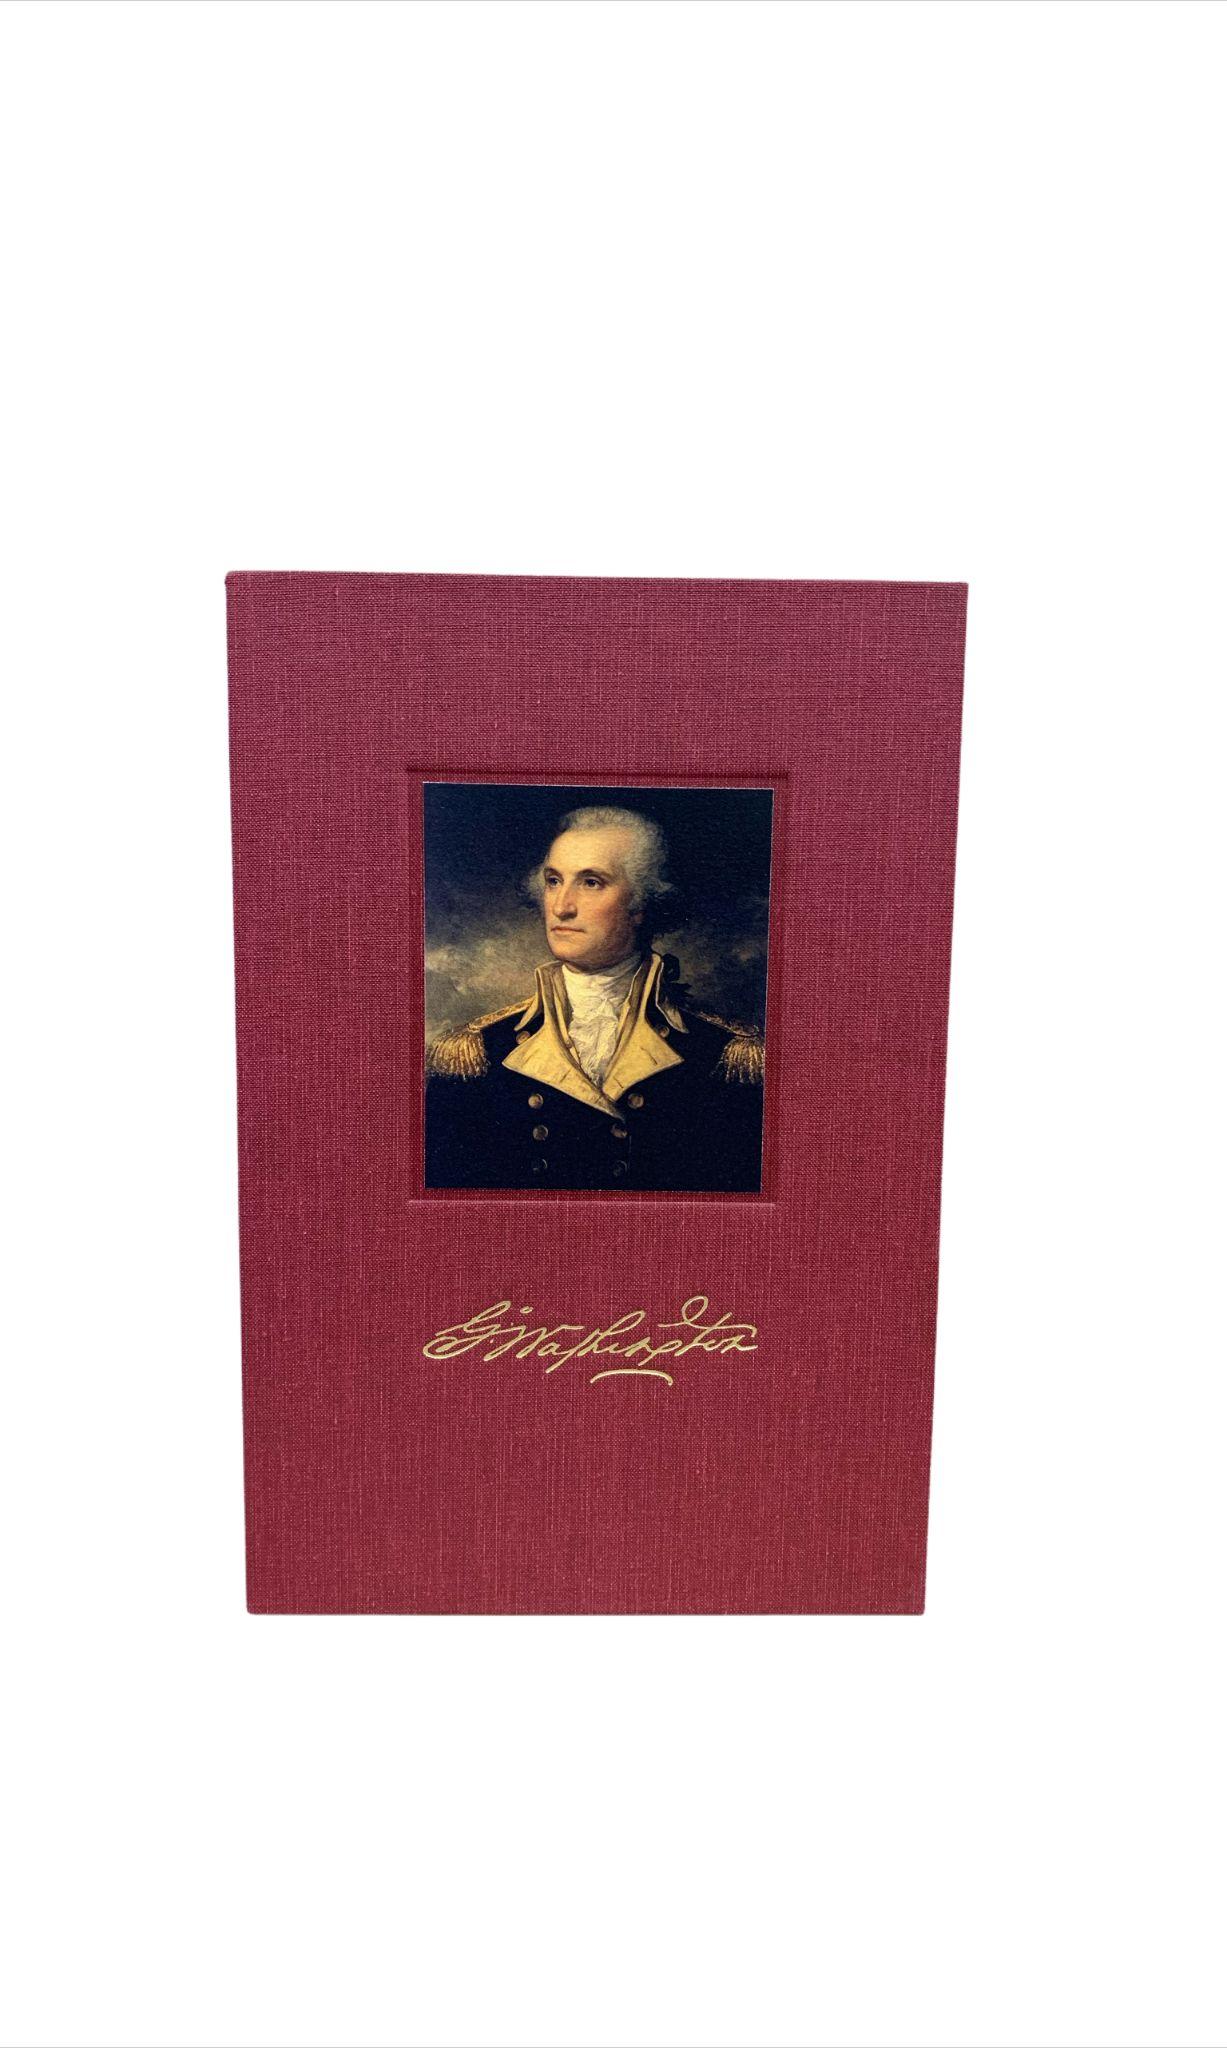 Leather Life of George Washington by John Marshall, 6-Vol with Maps, 1st Ed., 1804-1807